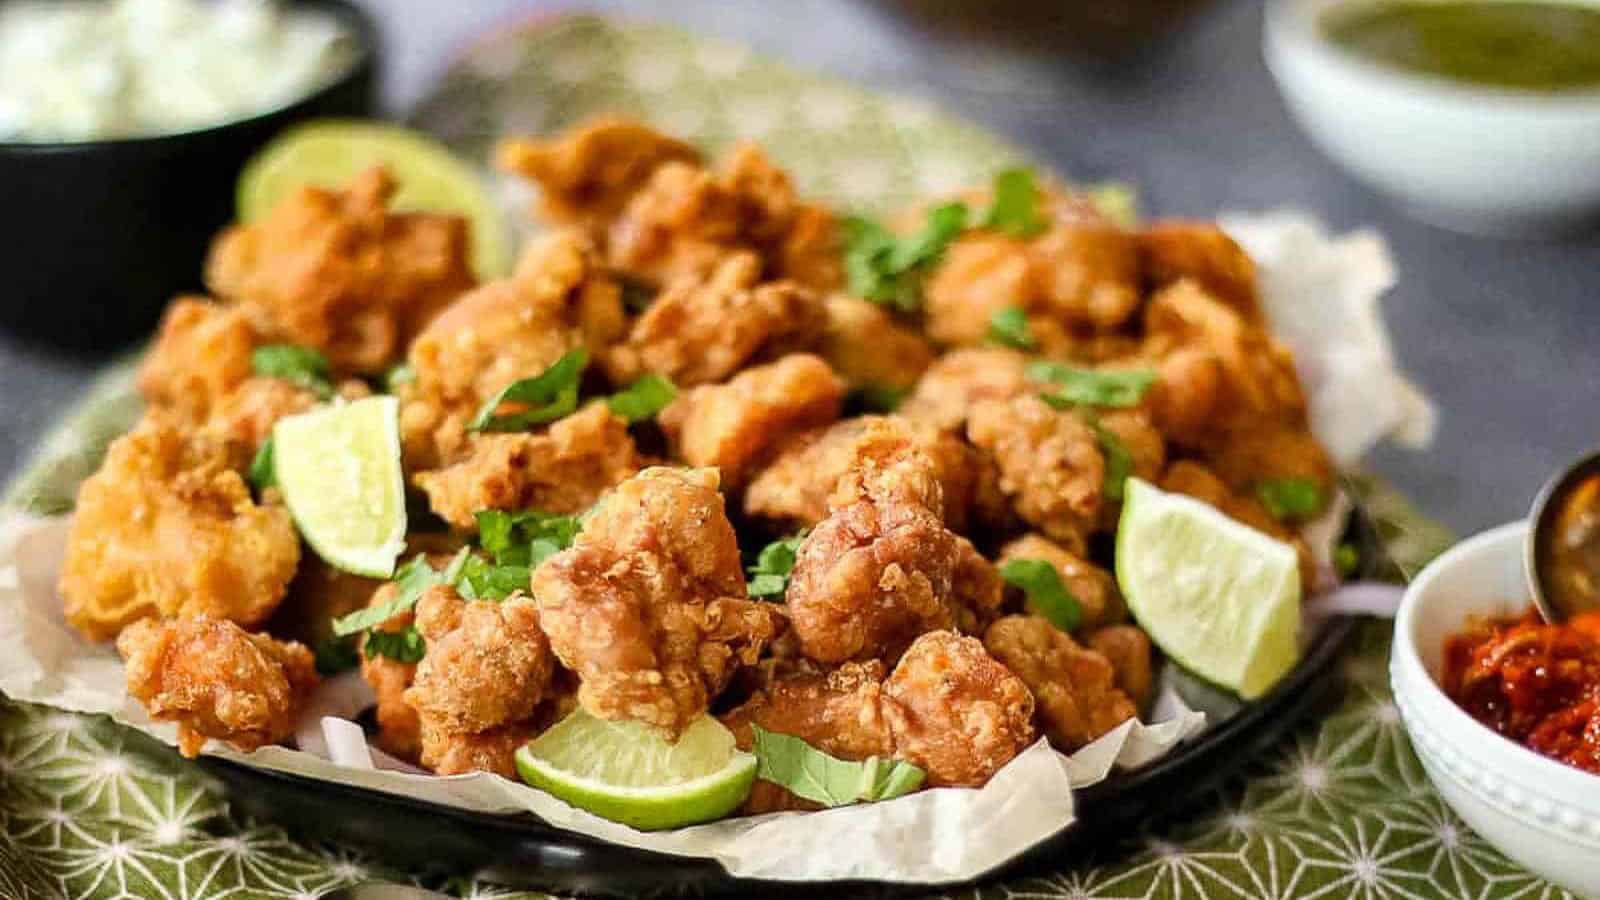 <p>Deep-fried and spiced, these chicken bites are like an Indian twist on chicken nuggets. They’re a snack that holds its own.</p><p><strong>Get the Recipe: </strong><a href="https://allwaysdelicious.com/chicken-pakora/?utm_source=msn&utm_medium=page&utm_campaign=Spice so nice: 19 delicious indian recipes to make at home">Chicken Pakora</a></p>